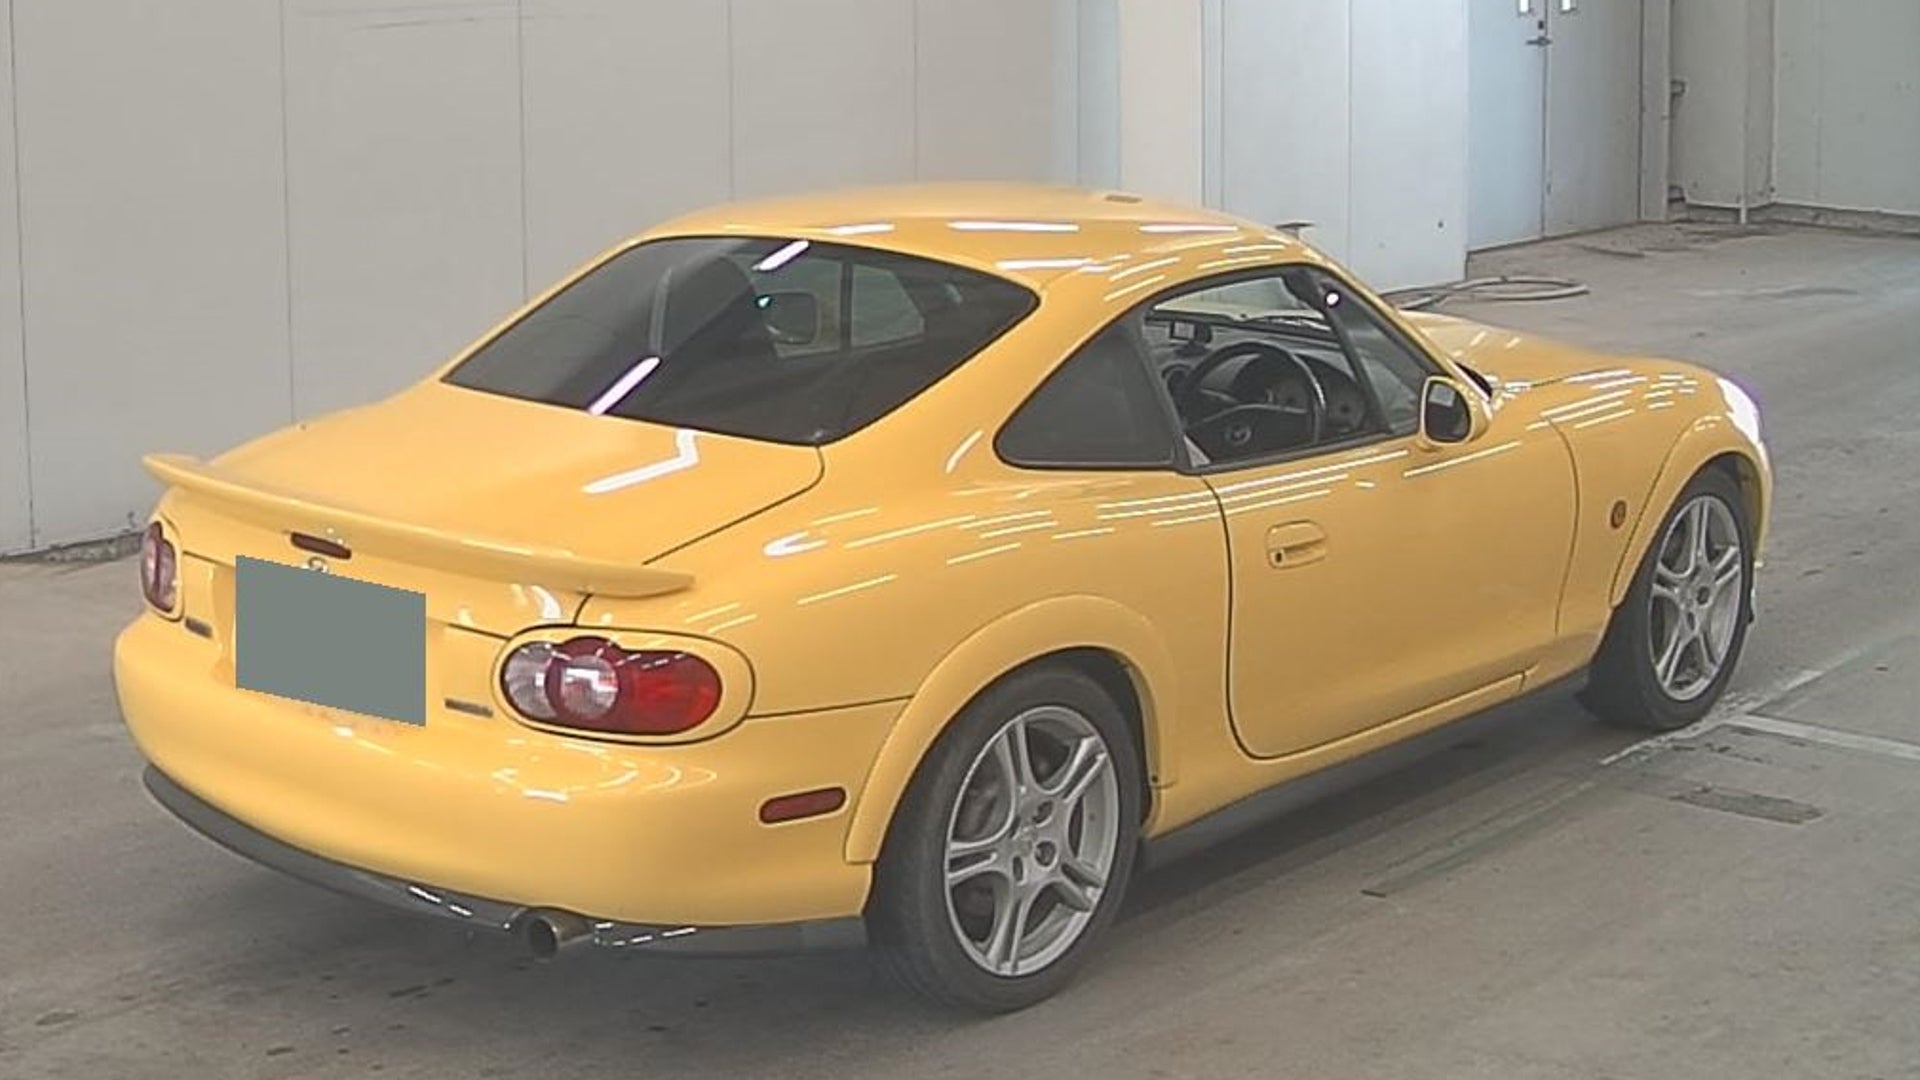 Rare Factory Hardtop Coupe Mazda Miata NB Up For Auction | The Drive